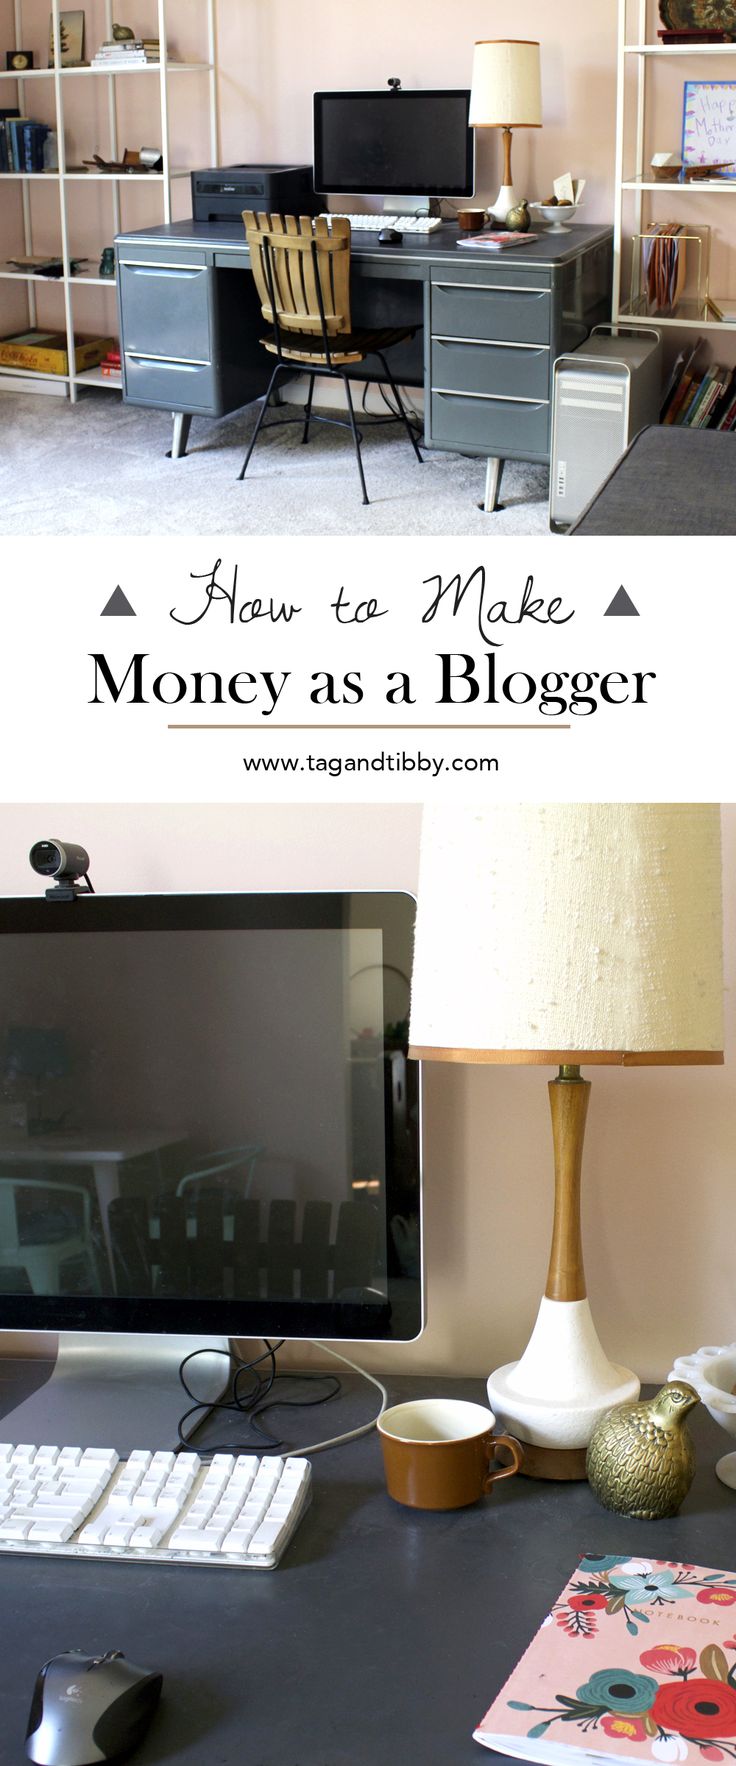 How to make money as a blogger | Tag&Tibby